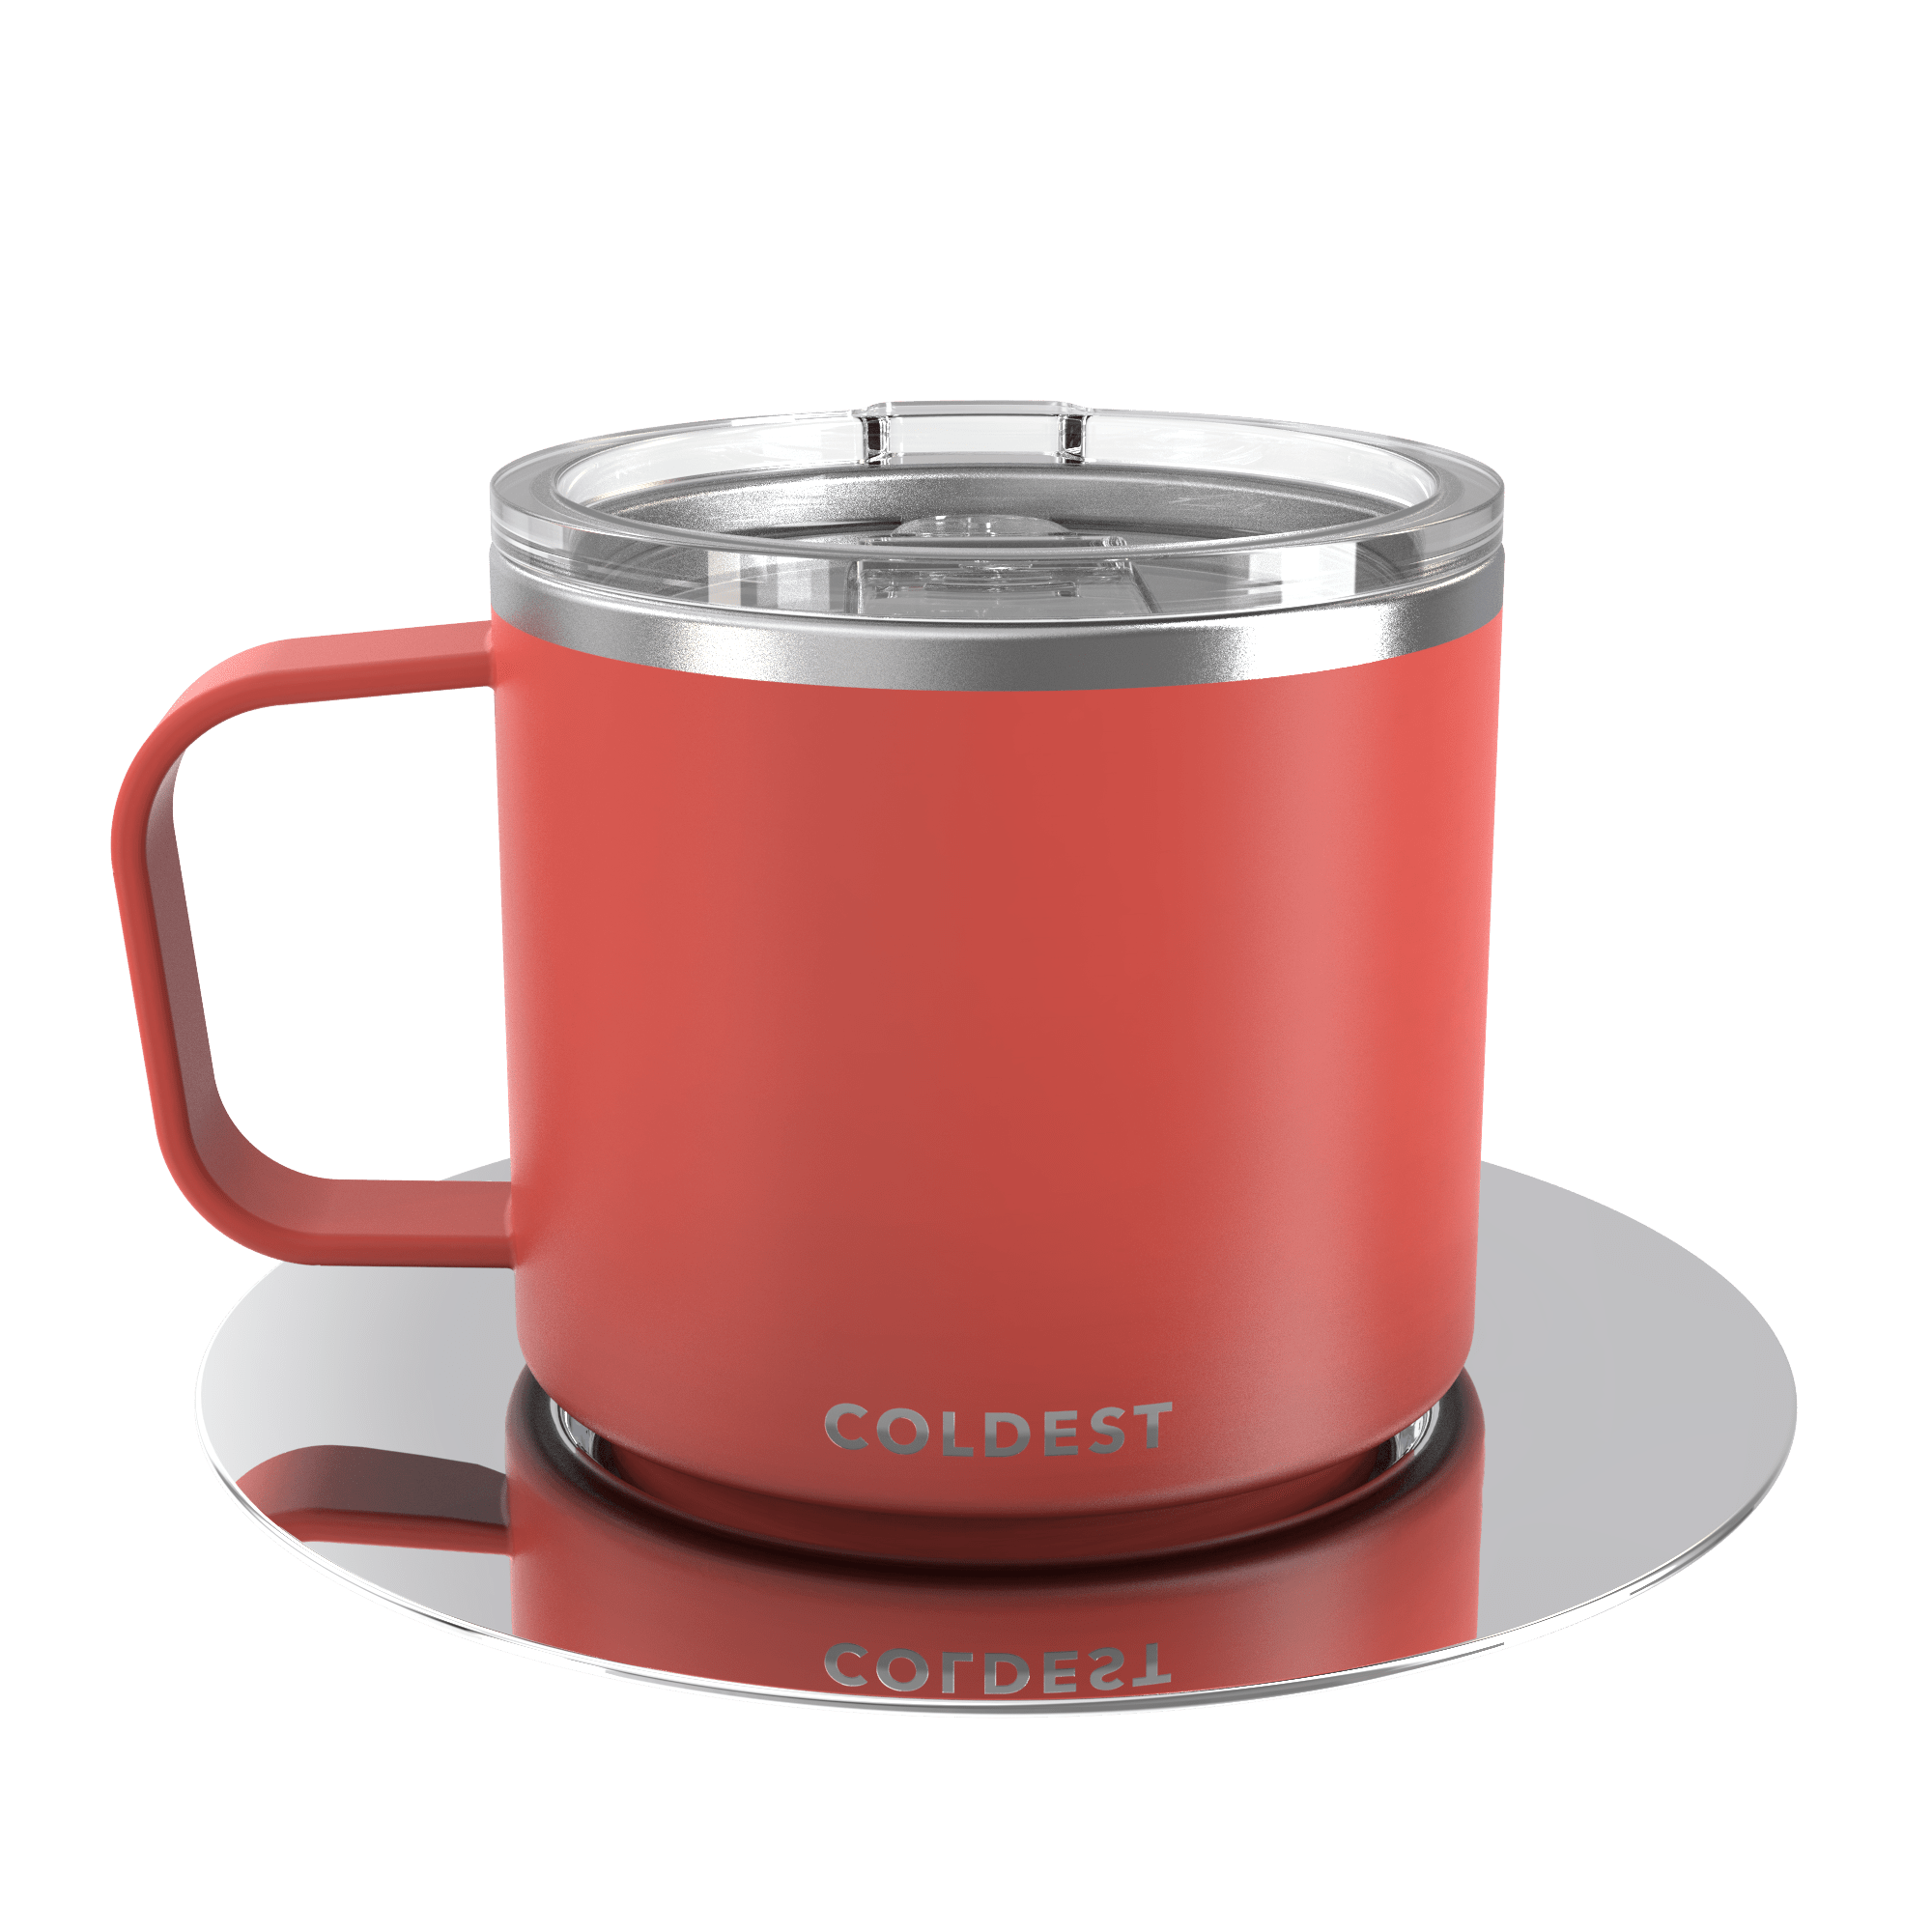 The Coldest Espresso Coffee Mug - Stainless Steel Super Insulated Travel  Mug for Hot & Cold Drinks, Best for Tea, Lattes, Cappuccino Coffee Cup(Plished  Steel, 4 Oz) 